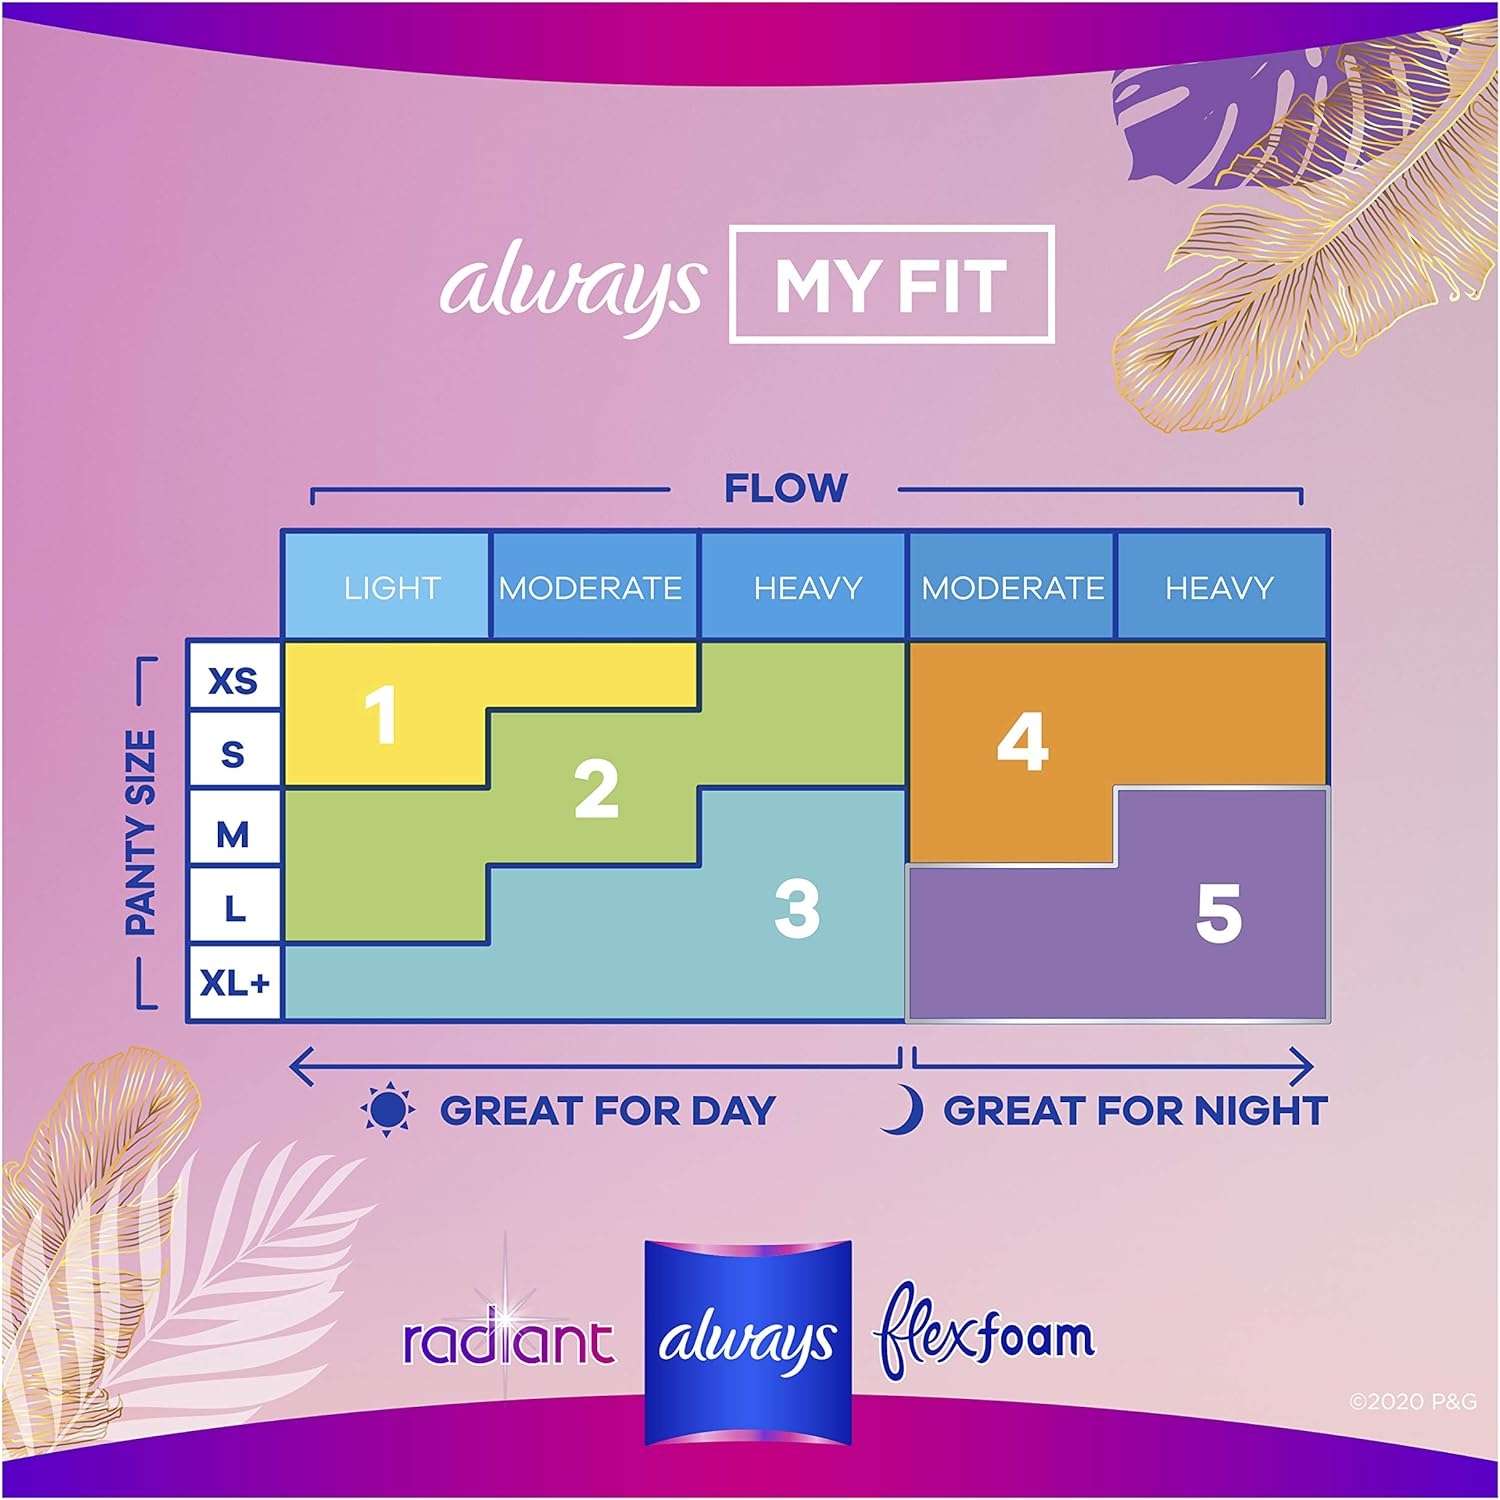 Always Radiant Pads, Size 2, Heavy Flow Absorbency, Light Clean Scent, 26 Count (Pack of 3)